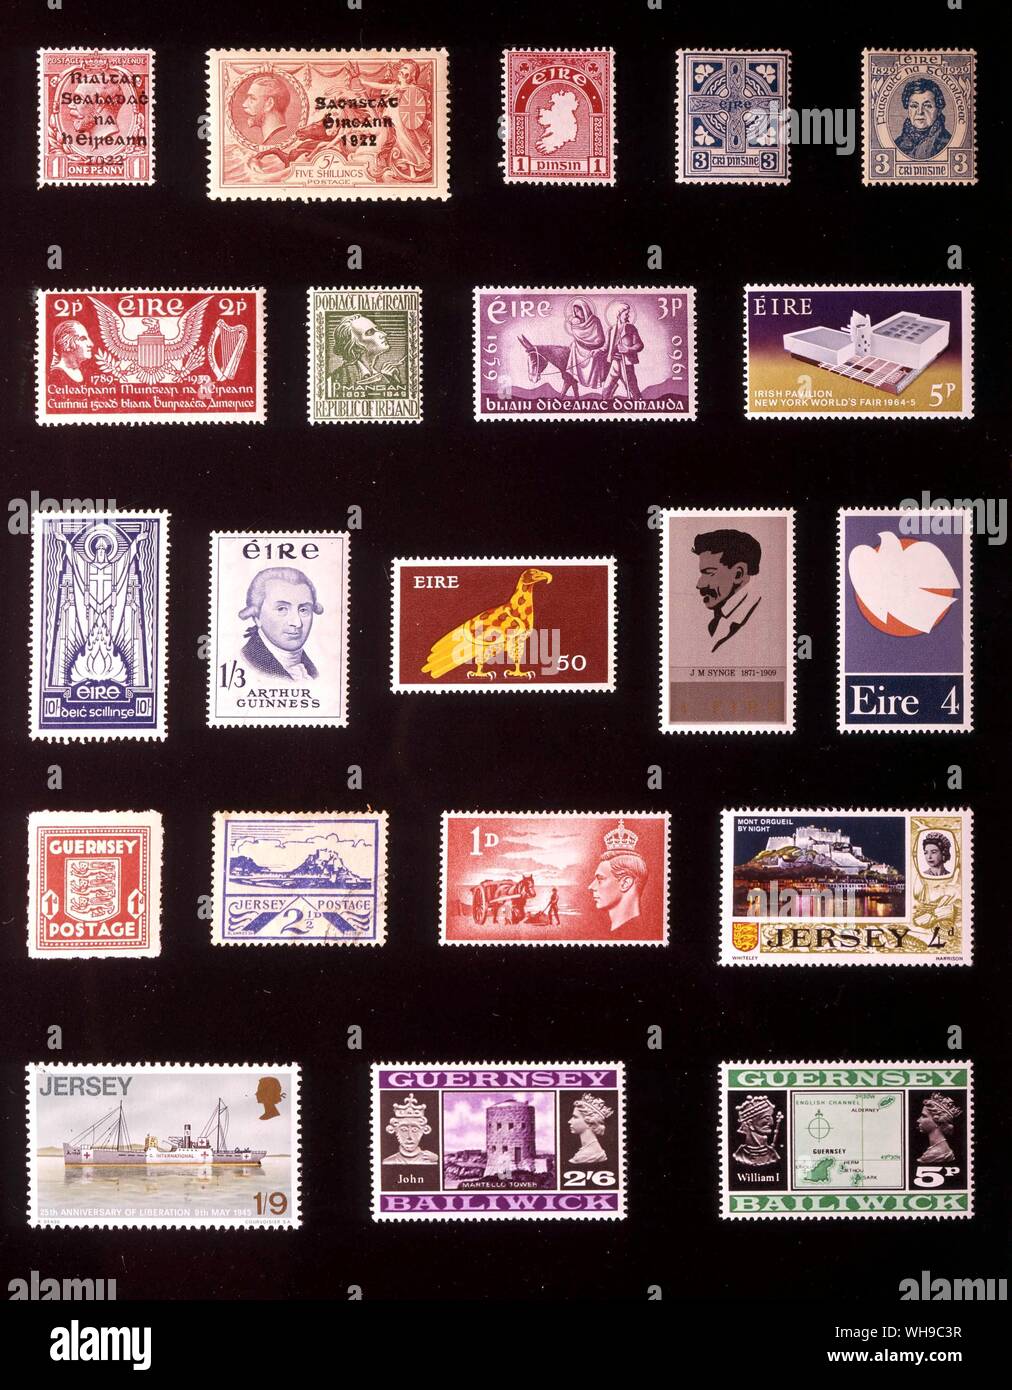 EUROPE - BRITISH ISLES INDEPENDENT POSTAL ADMINISTRATIONS: (left to right) 1. Provisional Government of Ireland, 1 penny, 1922, 2. Irish Free State, 5 shillings, 1935, 3. Eire (Ireland), 1 penny, 1923, 4. Eire, 3 pence, 1923, 5. 3 pence, 1929, 6. 2 pence, 1939, 7. 1 penny, 1949, 8. 3 pence, 1960, 9. 5 pence, 1964, 10. 10 shillings, 1937, 11. 1 shilling 3 pence, 1959, 12. 50 new pence, 1971, 13. 4 new pence, 1972, 15. Guernsey, 1 penny, 1941, 16. Jersey, 2.5 pence, 1943, 17. Channel Islands, 1 penny, 1948, 18. Jersey, 4 pence, 1969, 19. Jersey, 1 shilling 9 pence, 1970, 20. Guernsey, 2 Stock Photo